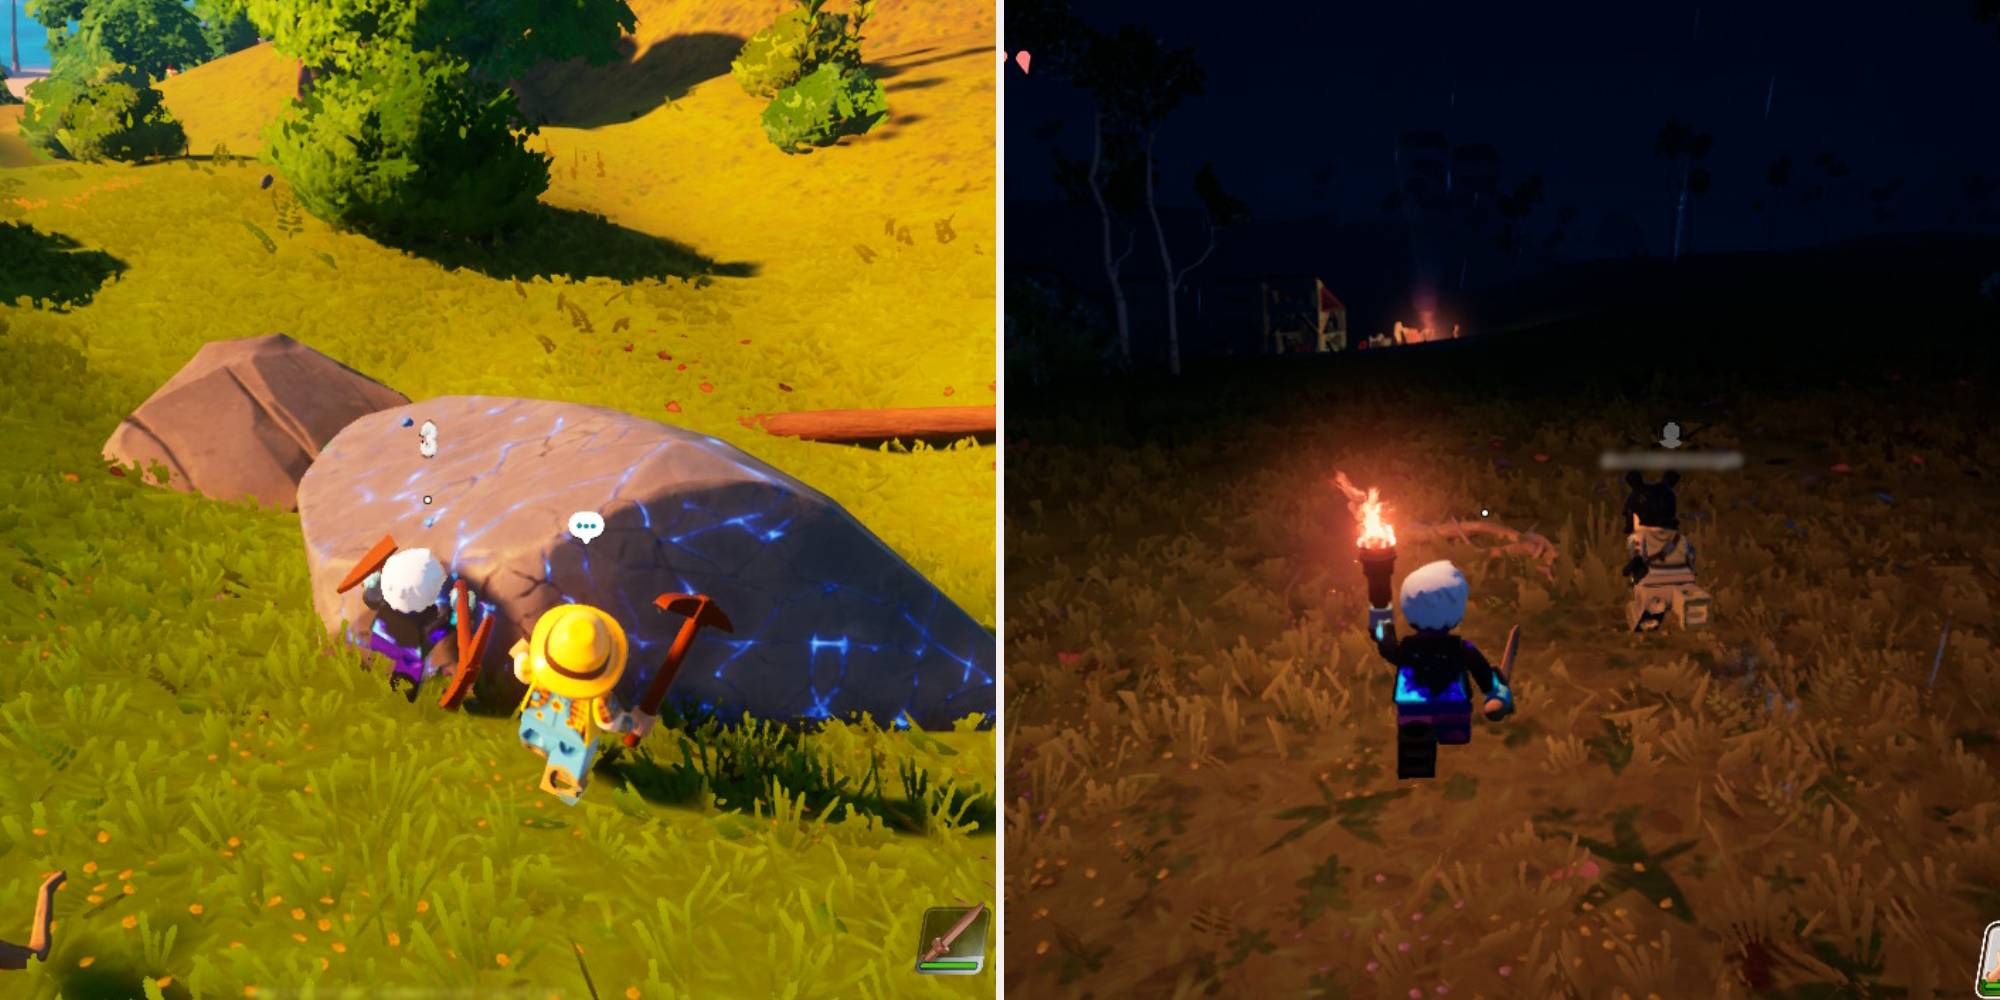 Left, two Lego characters mining a rock together. Right, two Lego players running side by side.